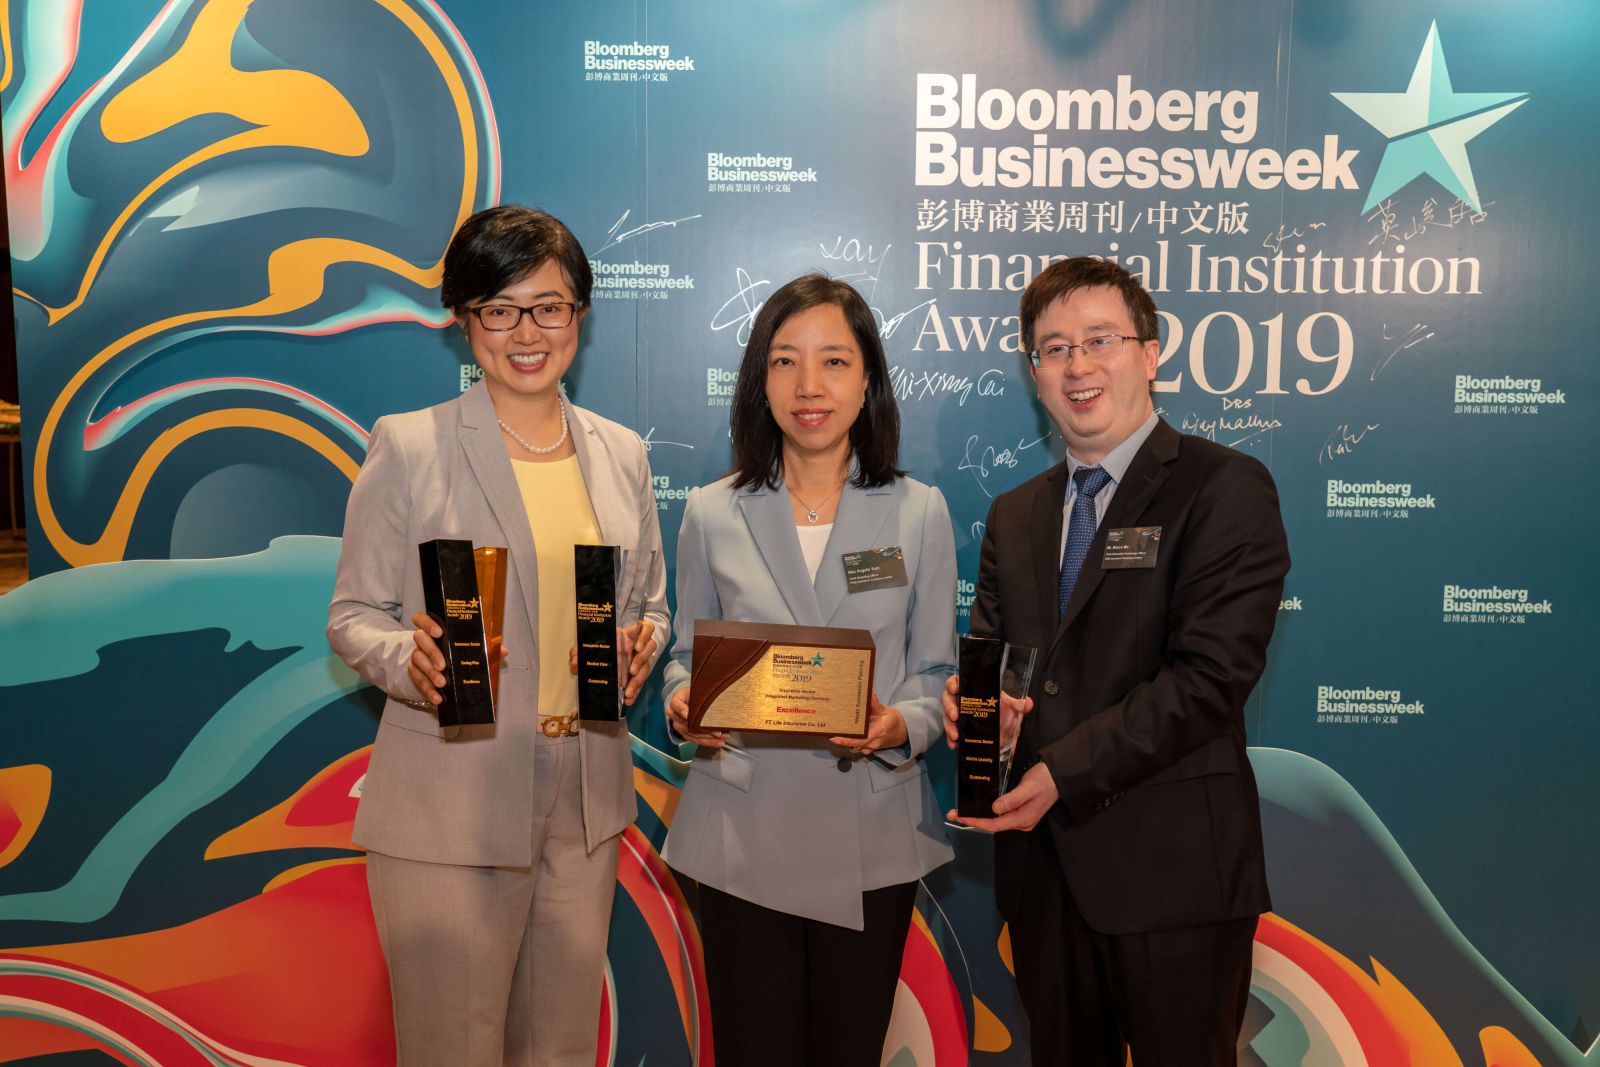 FTLife collected 4 awards in Bloomberg Businessweek/Chinese Edition “Financial Institution Awards 2019”